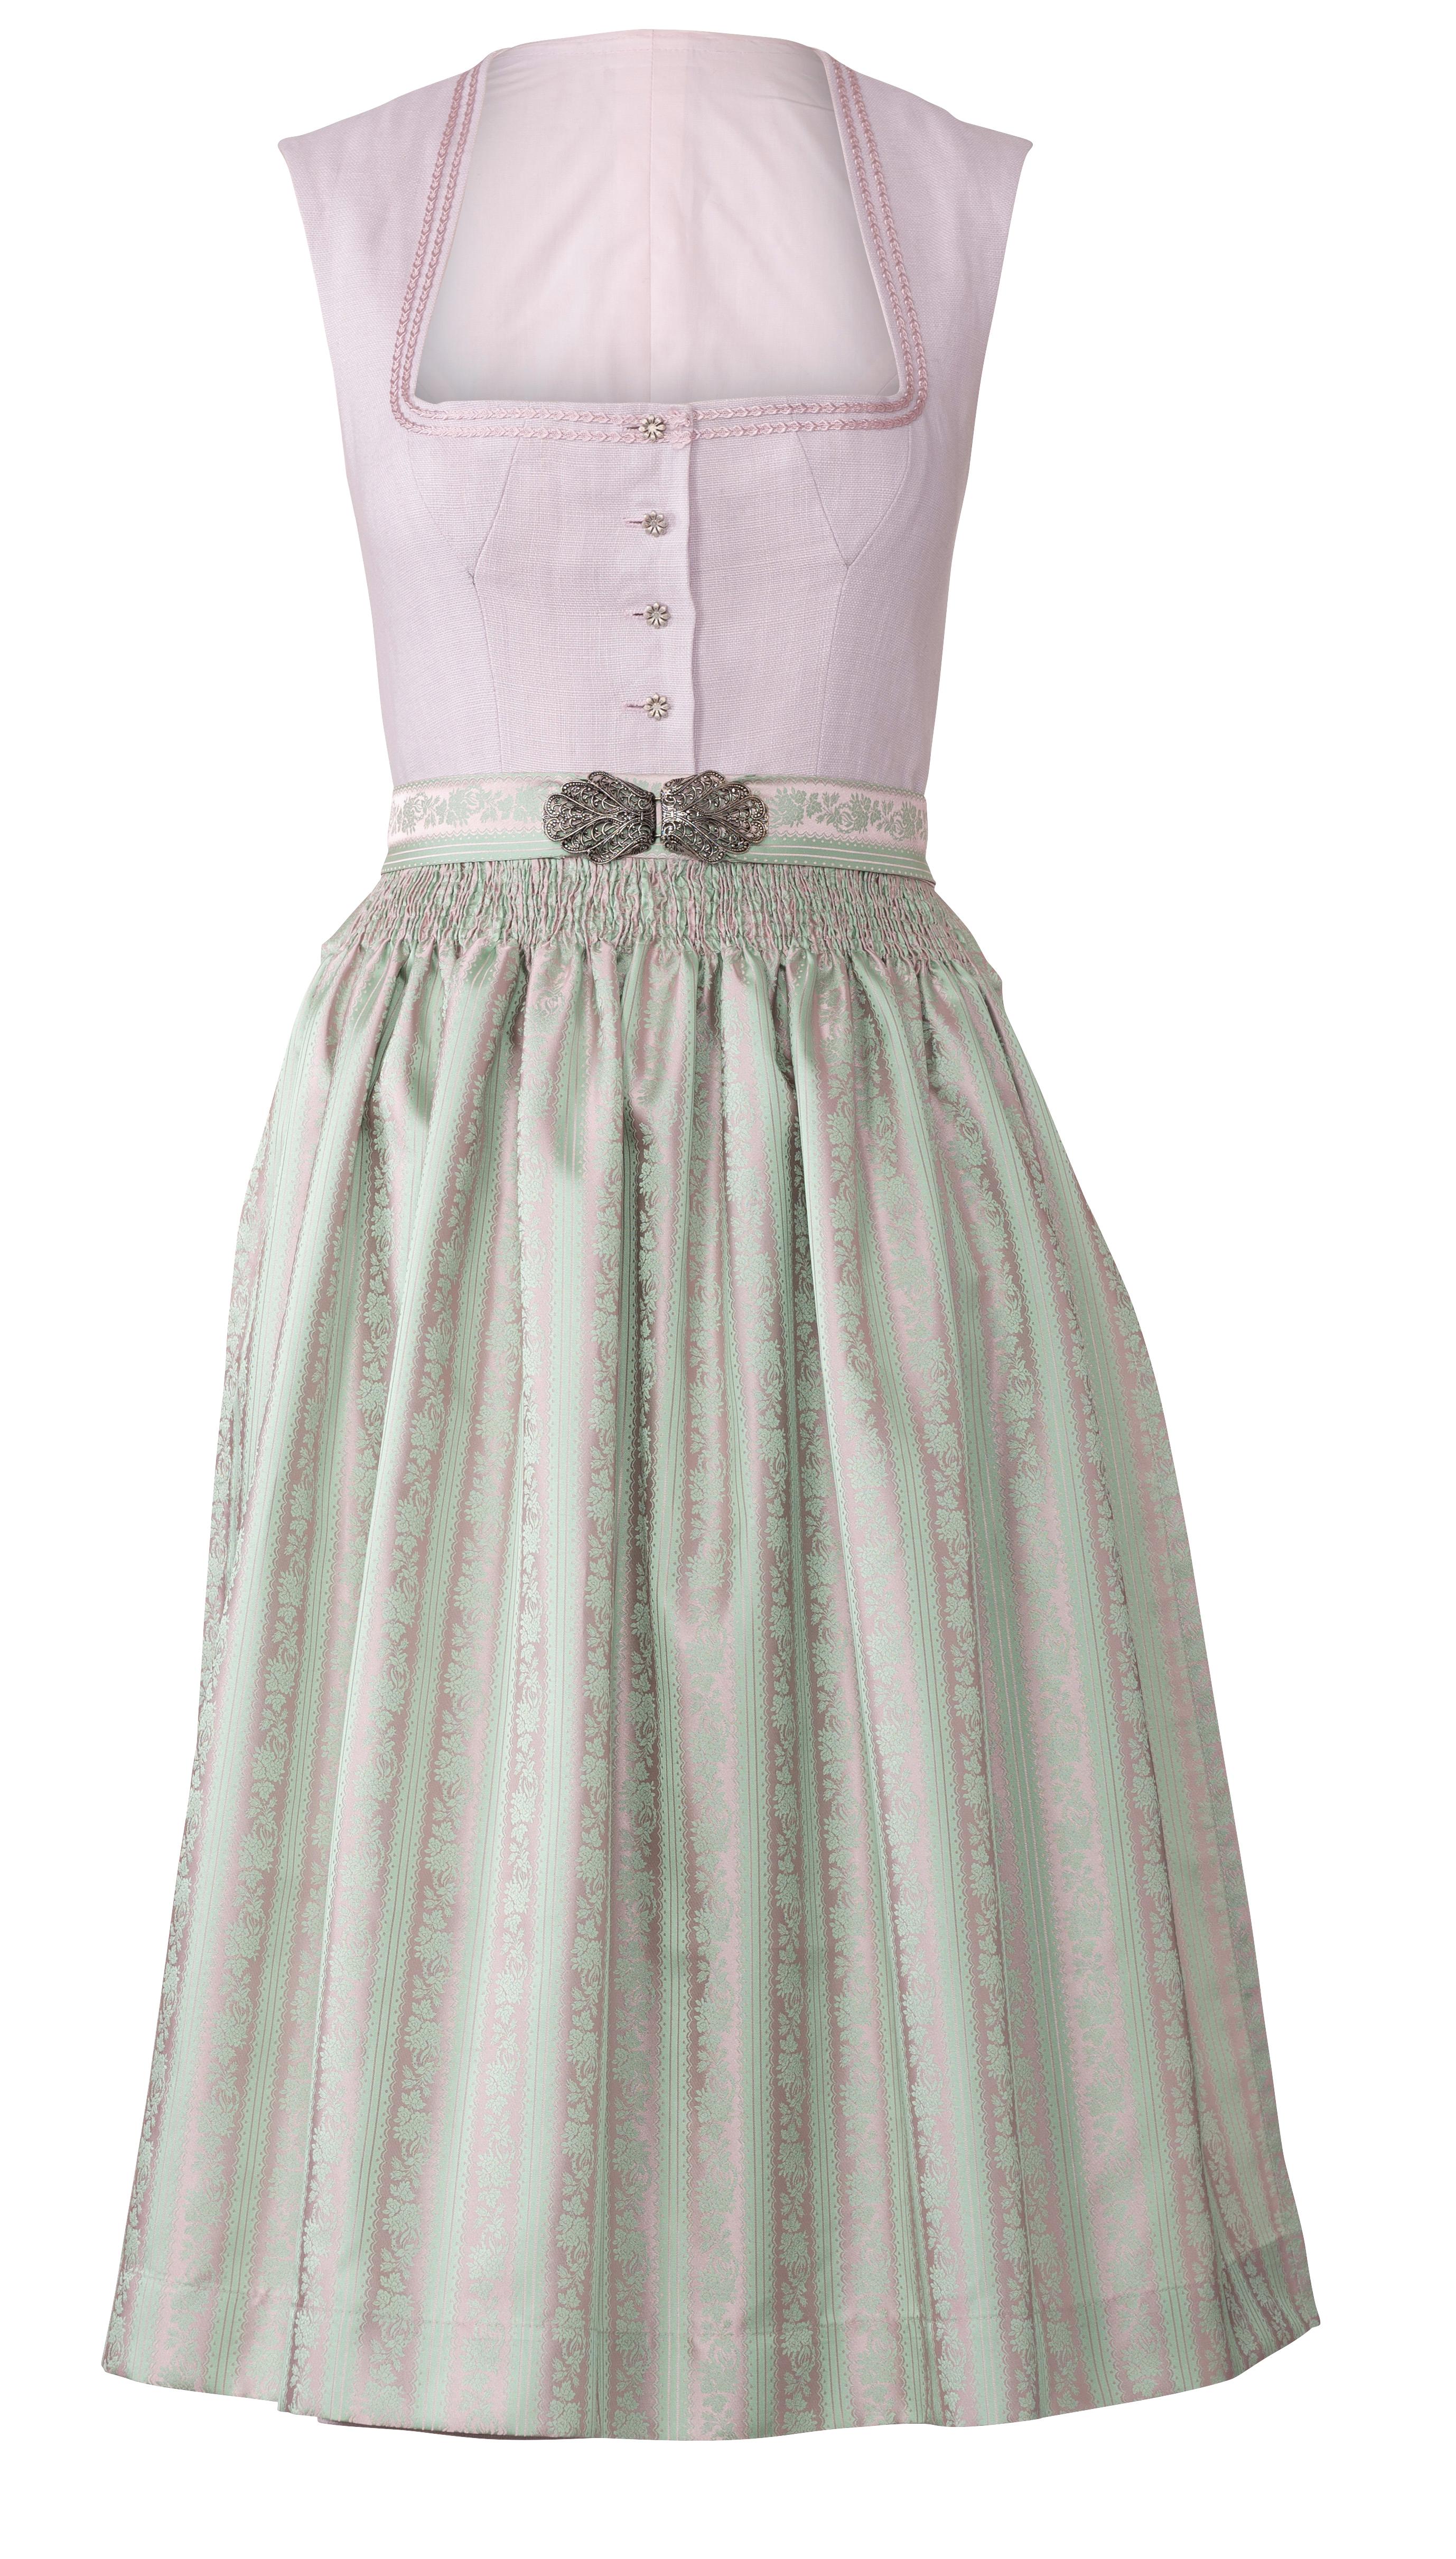 Burda 6268 Misses' pinafore Dress in Dirndl-Style, Blouse and Apron